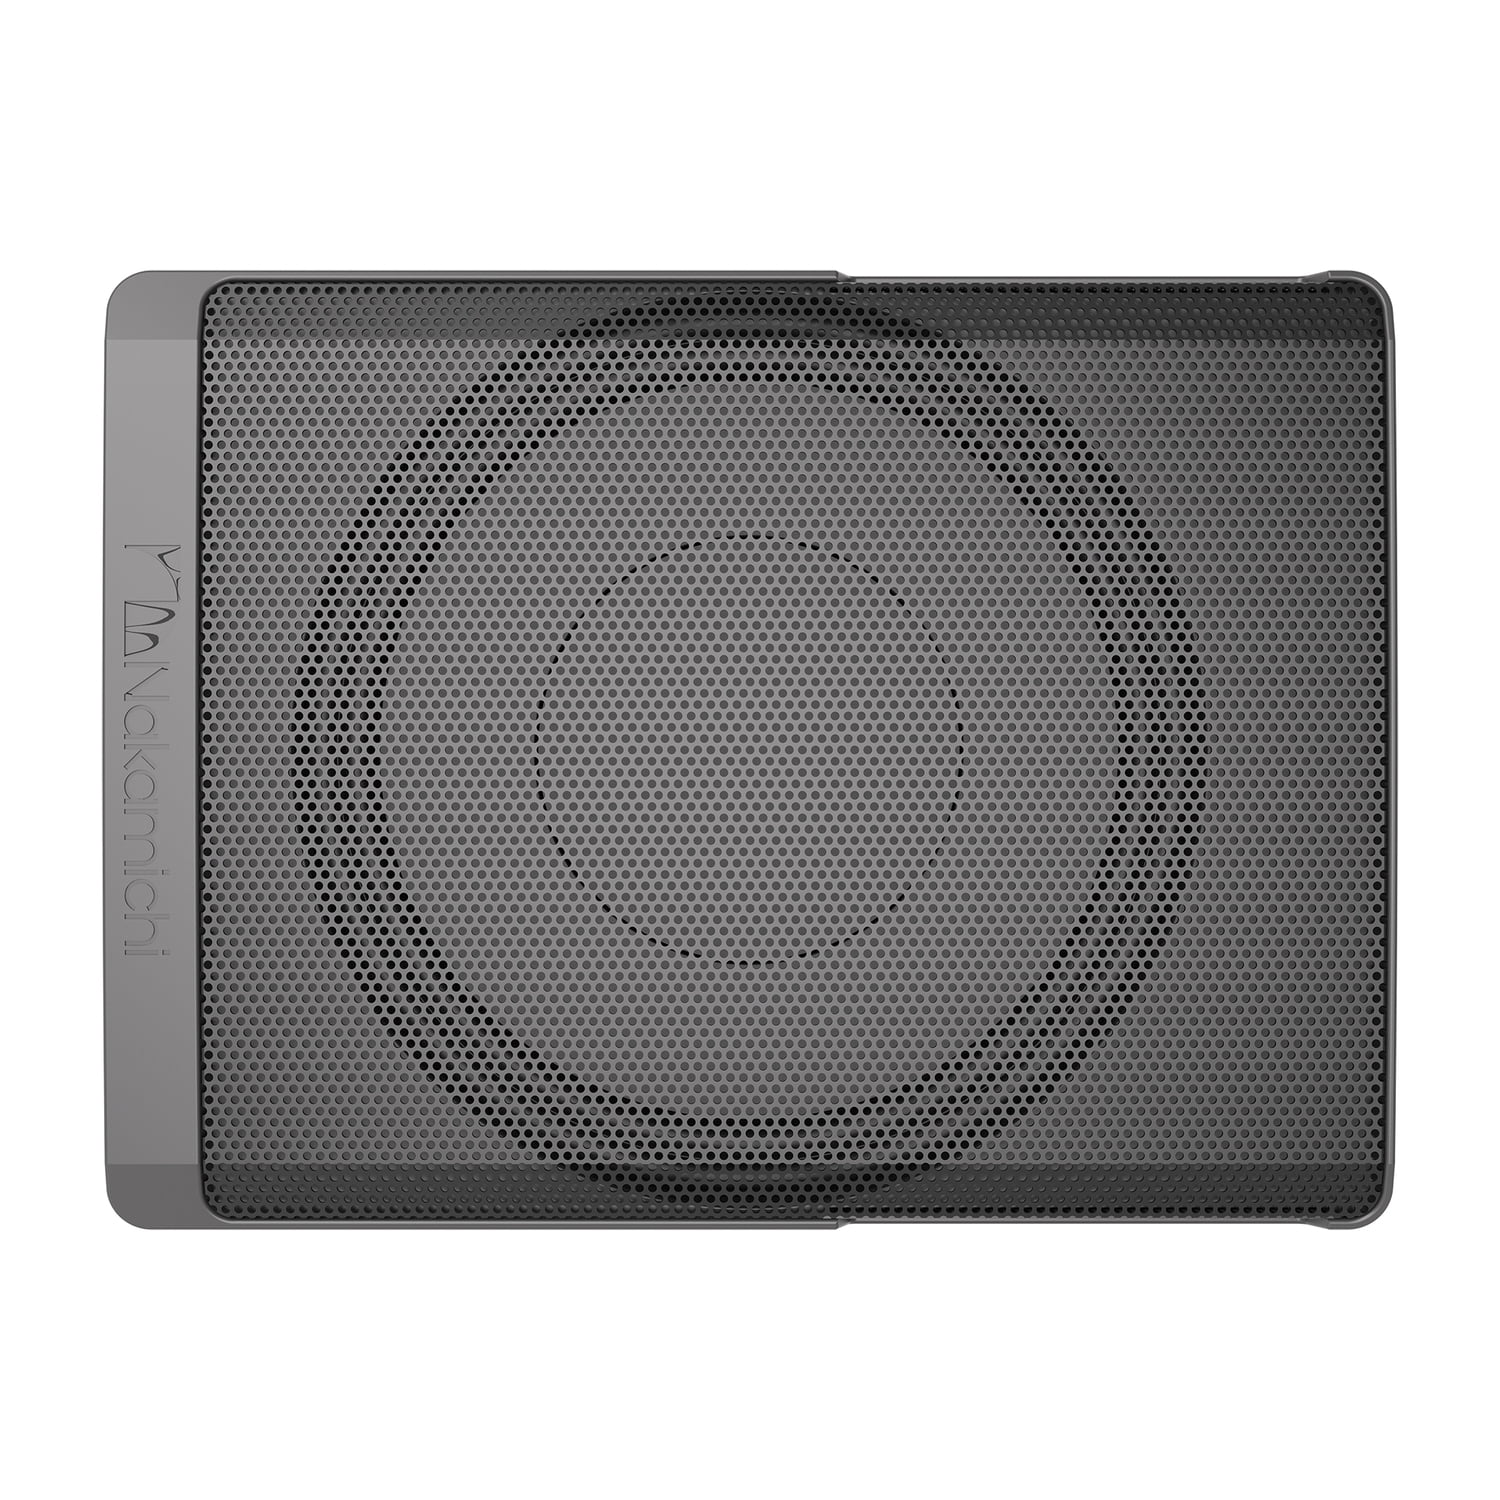 Nakamichi NM-NBF25.0A 10-In. 1,000-Watt Peak Power Active Under-Seat Subwoofer with Wired Remote Walmart.com